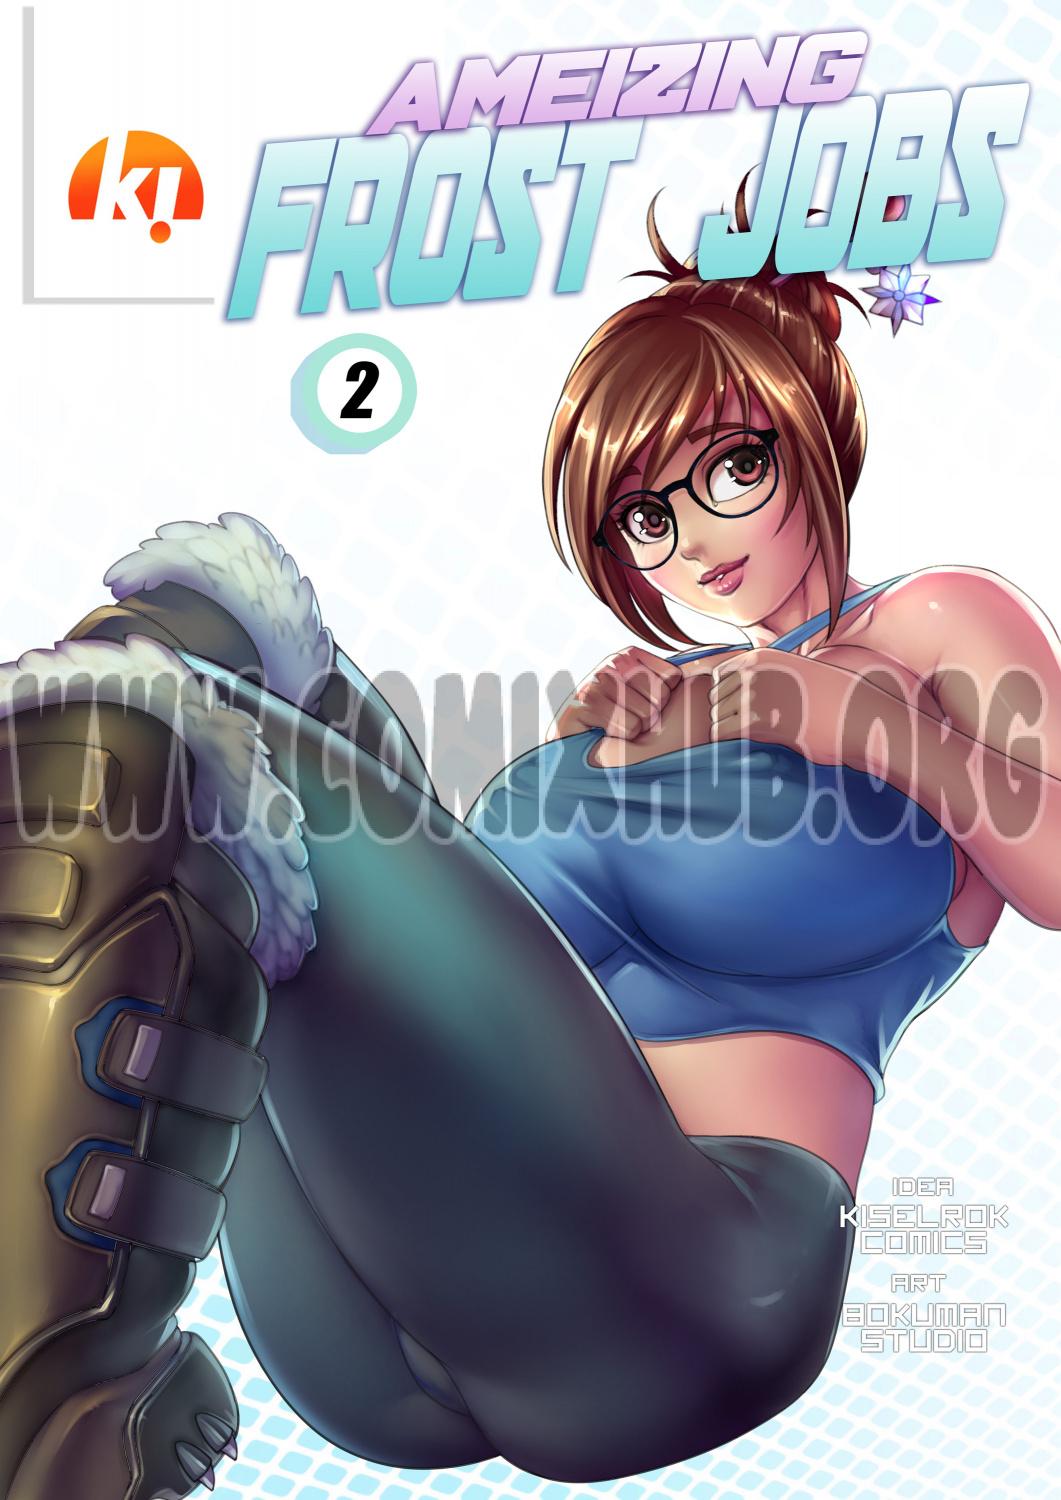 Ameizing Frost Jobs 2 porn comics Oral sex, Anal Sex, Big Tits, Blowjob, Creampie, Double Penetration, Sci-Fi, Straight, Threesome